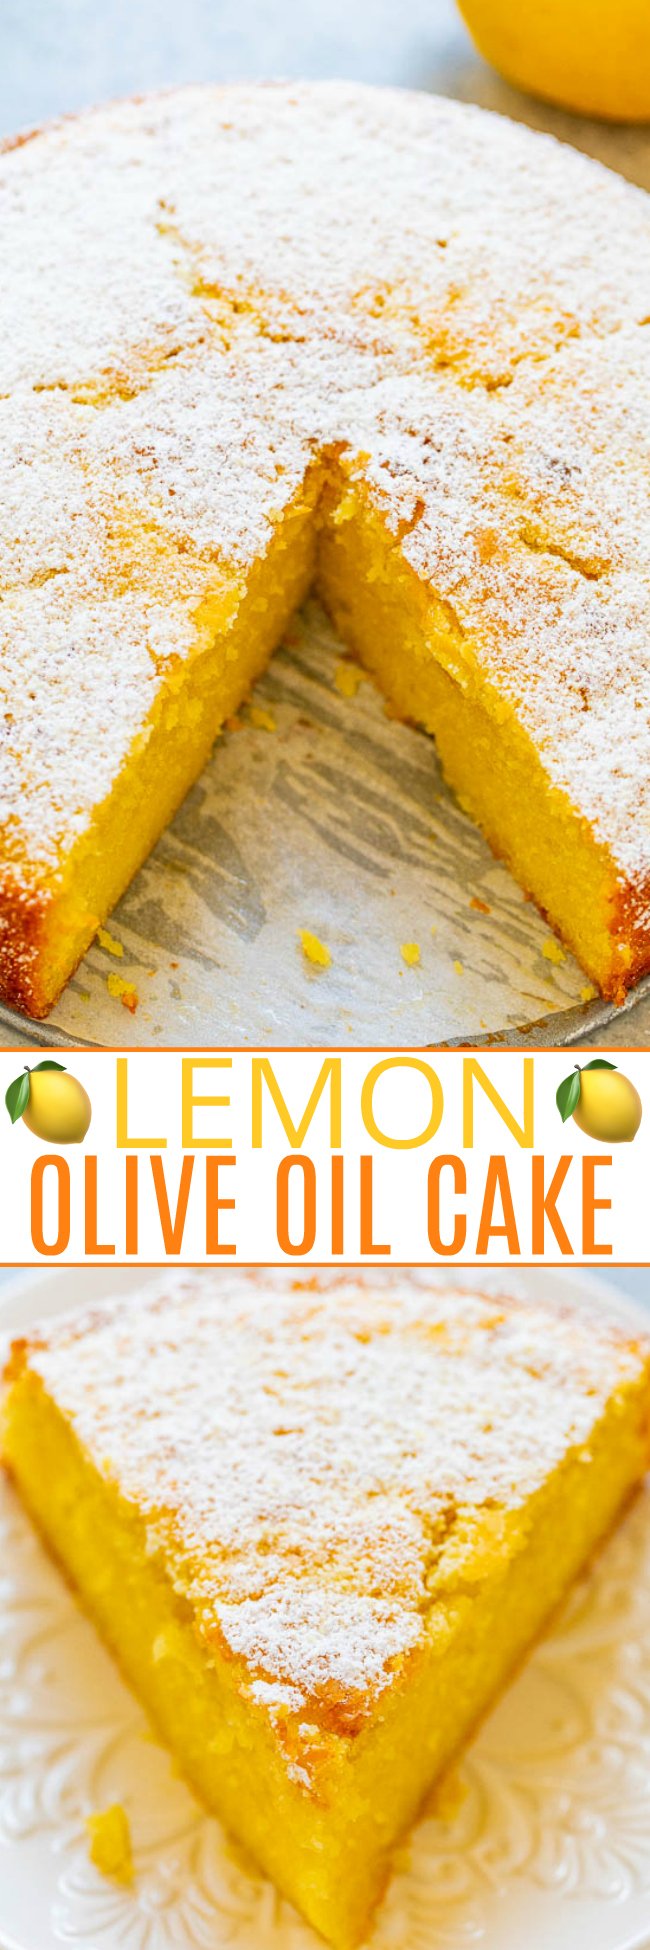 Lemon Olive Oil Cake - My new FAVORITE lemon dessert of all time!! Lemon zest, juice, extract, and Limoncello add so much AMAZING lemon flavor to this EASY, ridiculously moist no-mixer cake that’s unique and INCREDIBLE!!